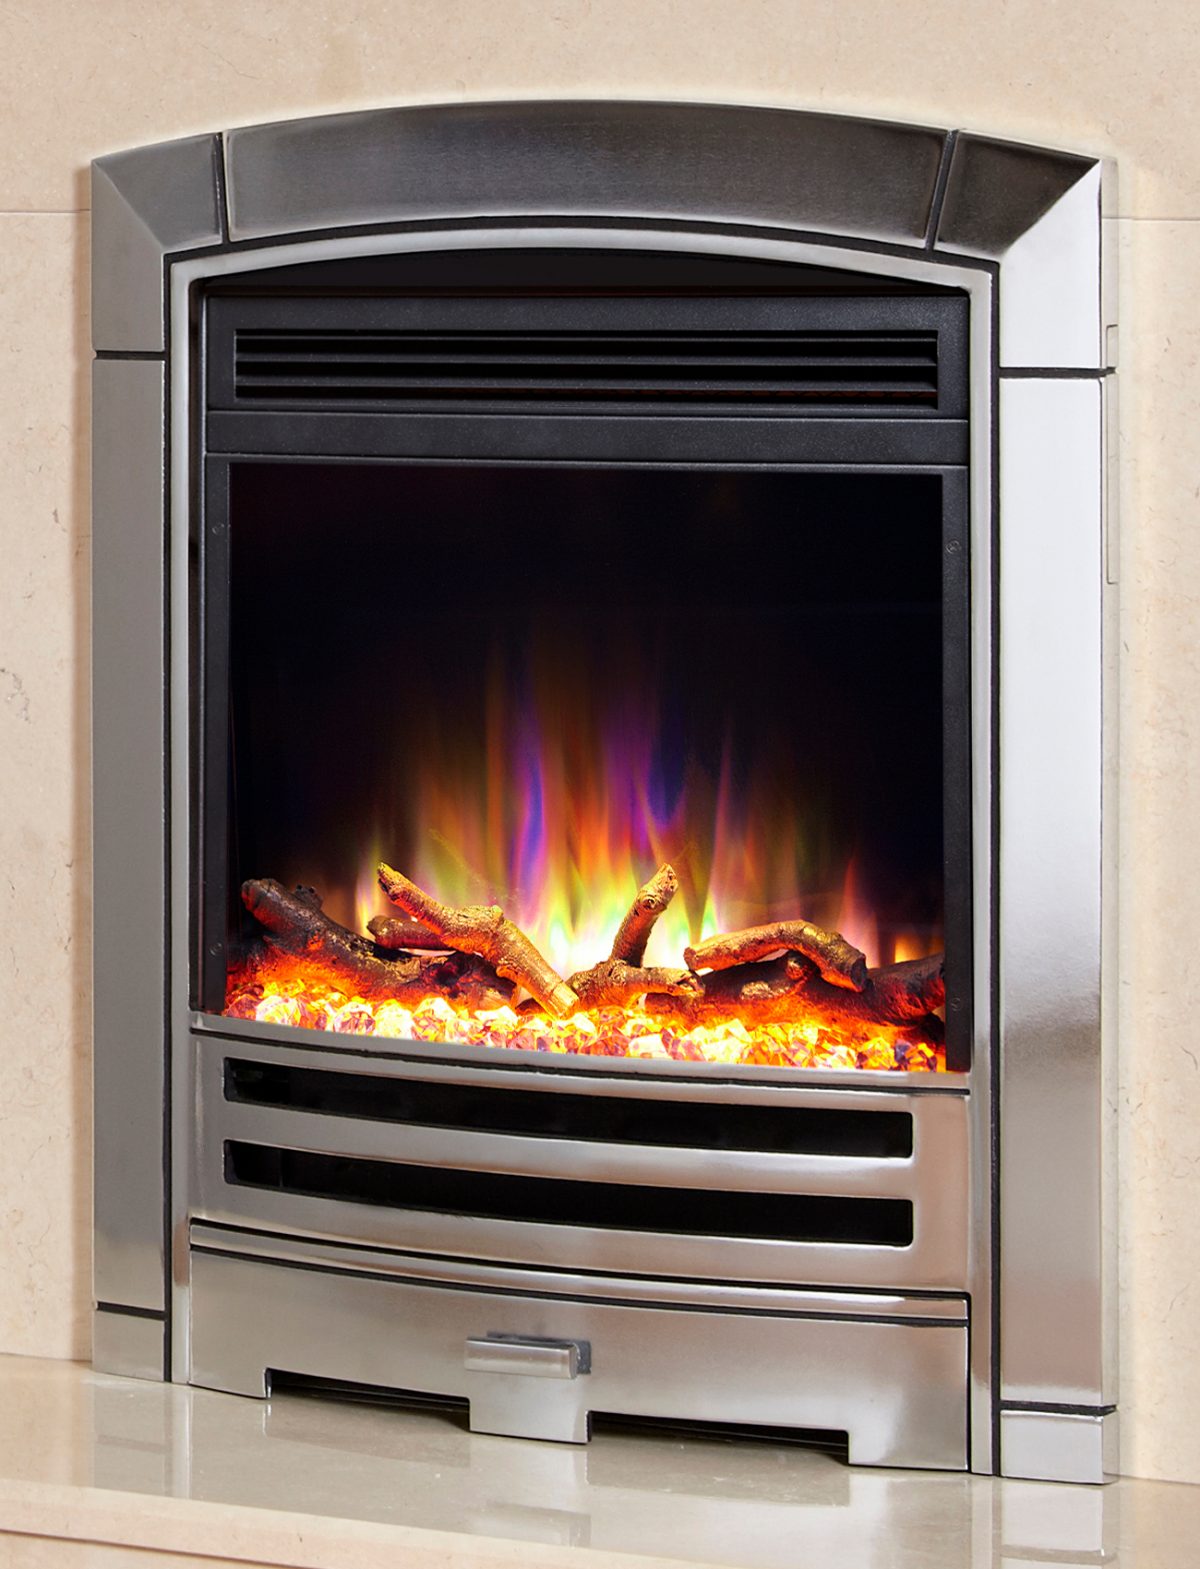 Celsi Electriflame XD Hearth Mounted Decadence Electric Fire in Silver